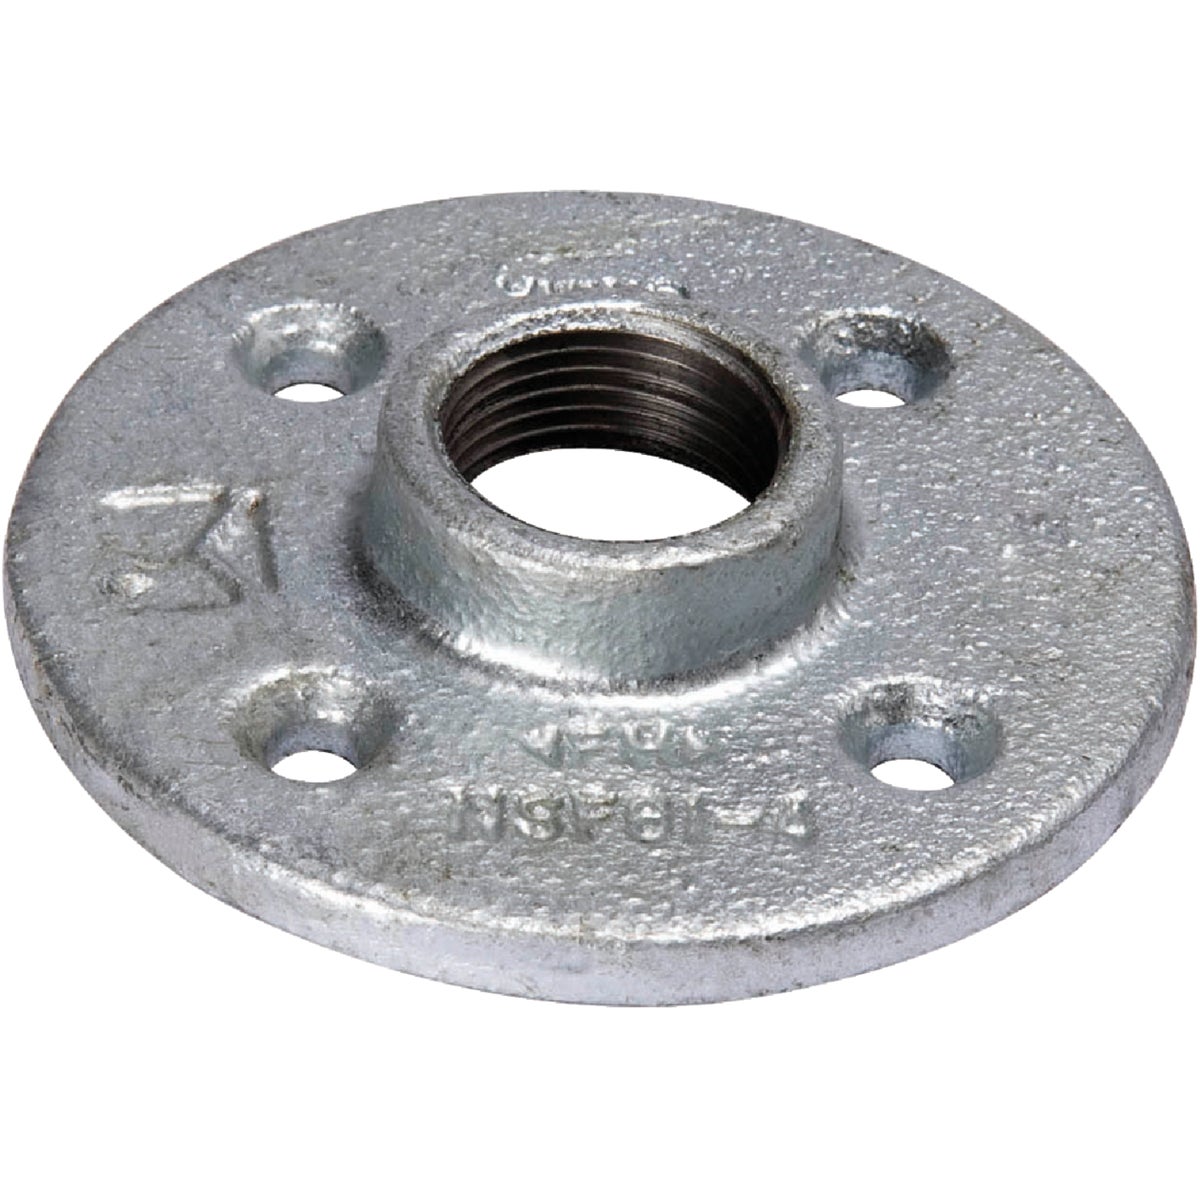 Southland 2 In. Malleable Iron Galvanized Floor Flange